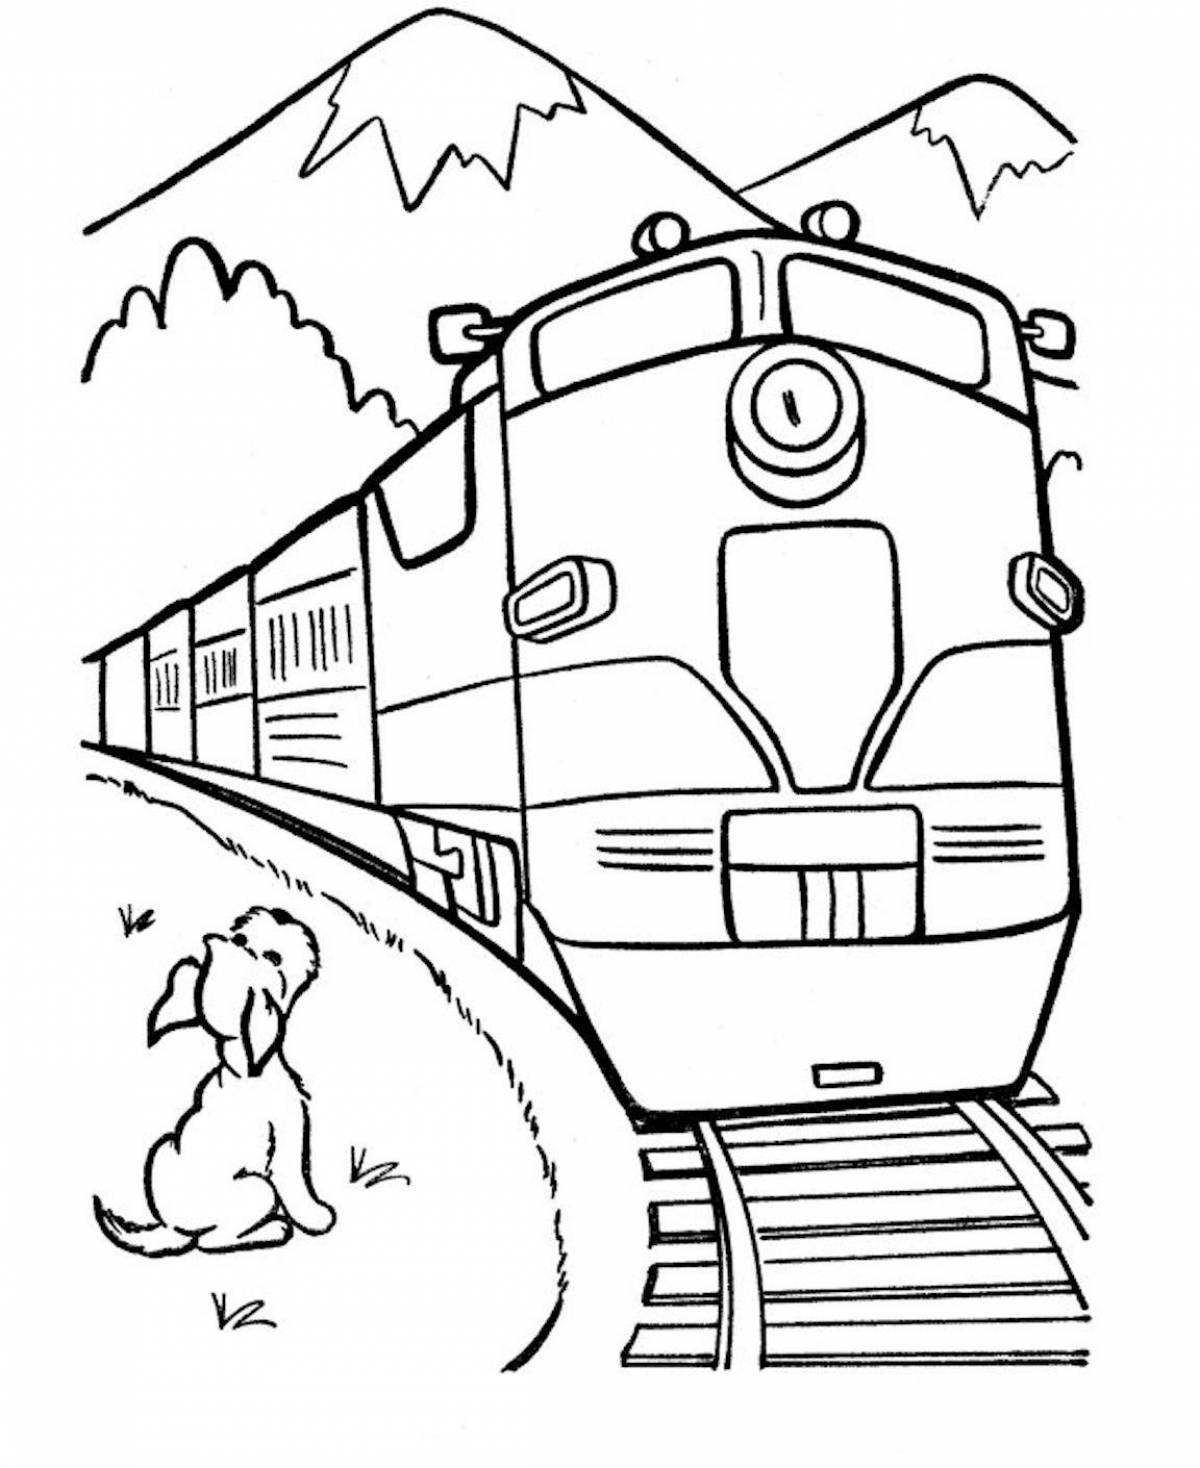 Coloring cute train for boys